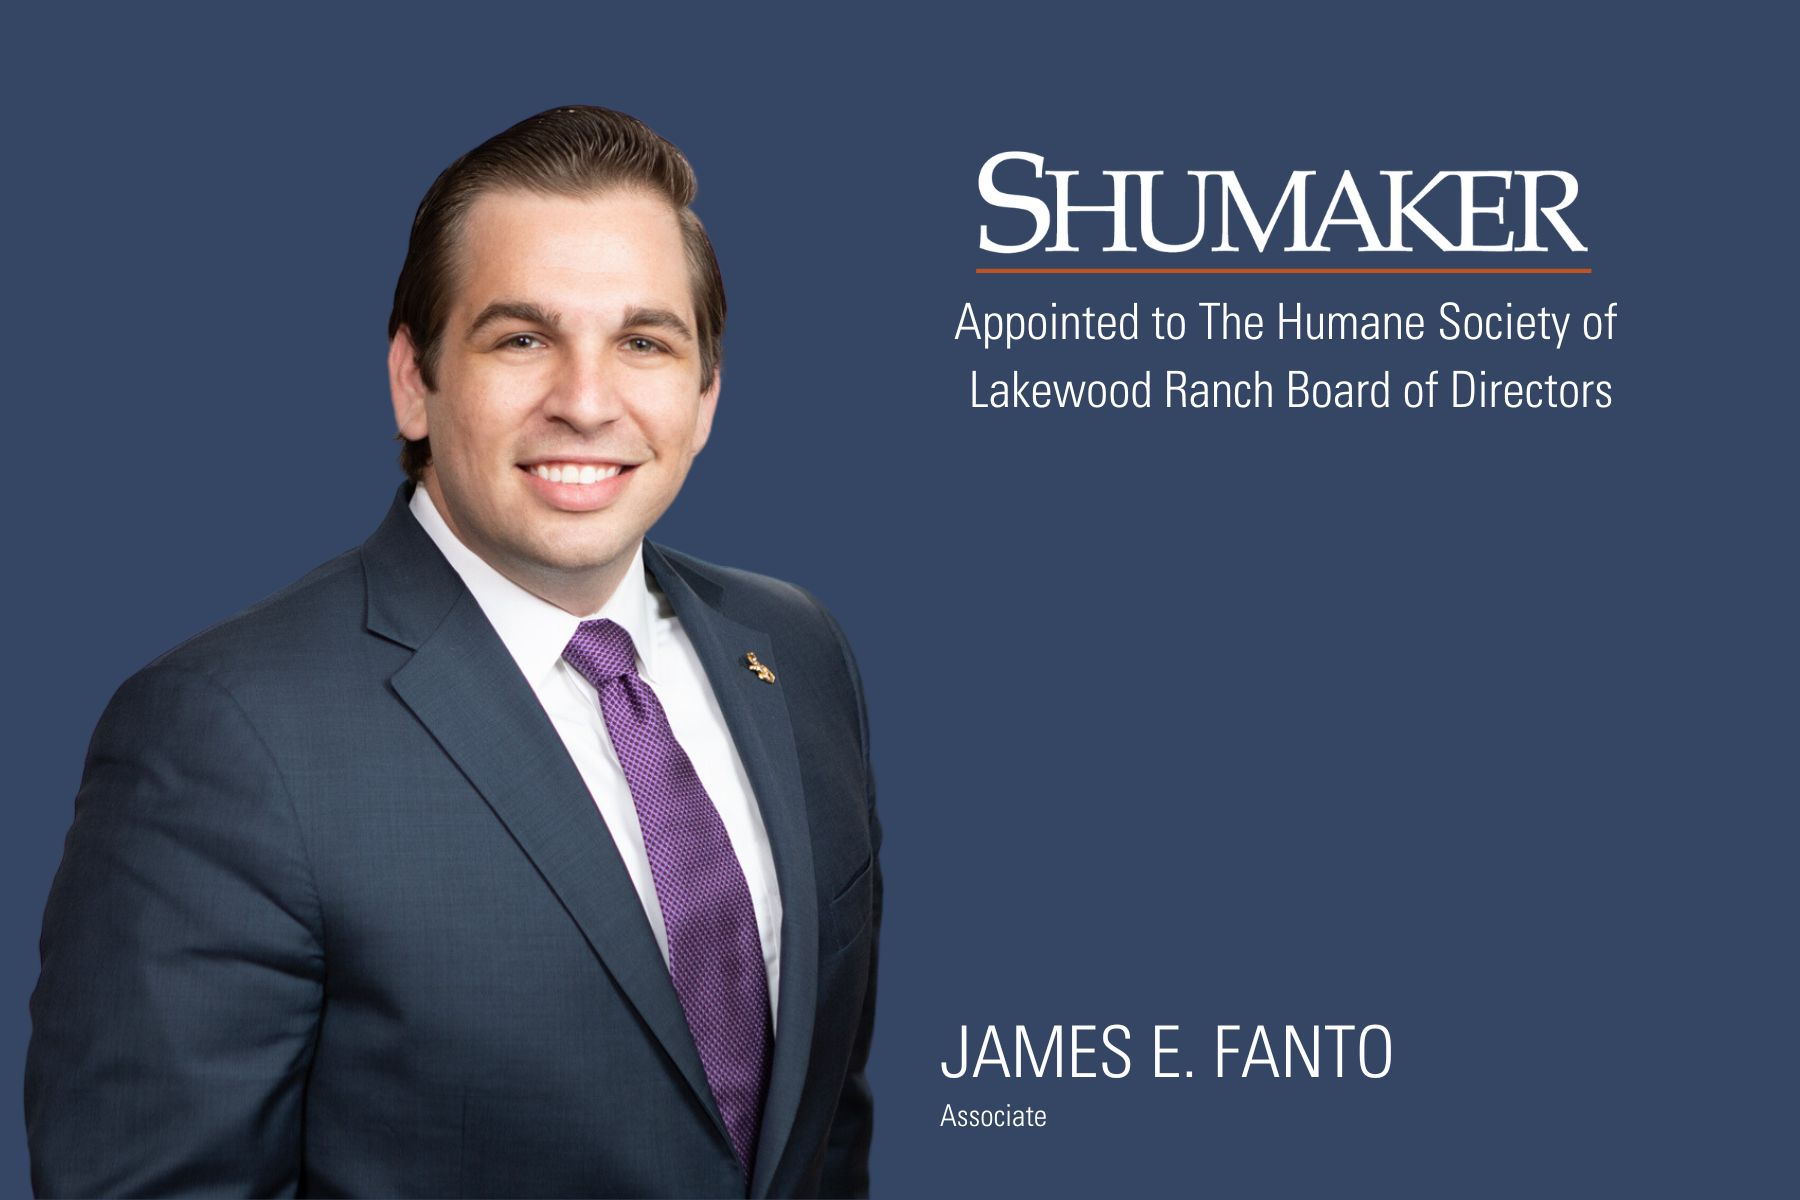 James E. Fanto Joins The Humane Society of Lakewood Ranch Board of Directors